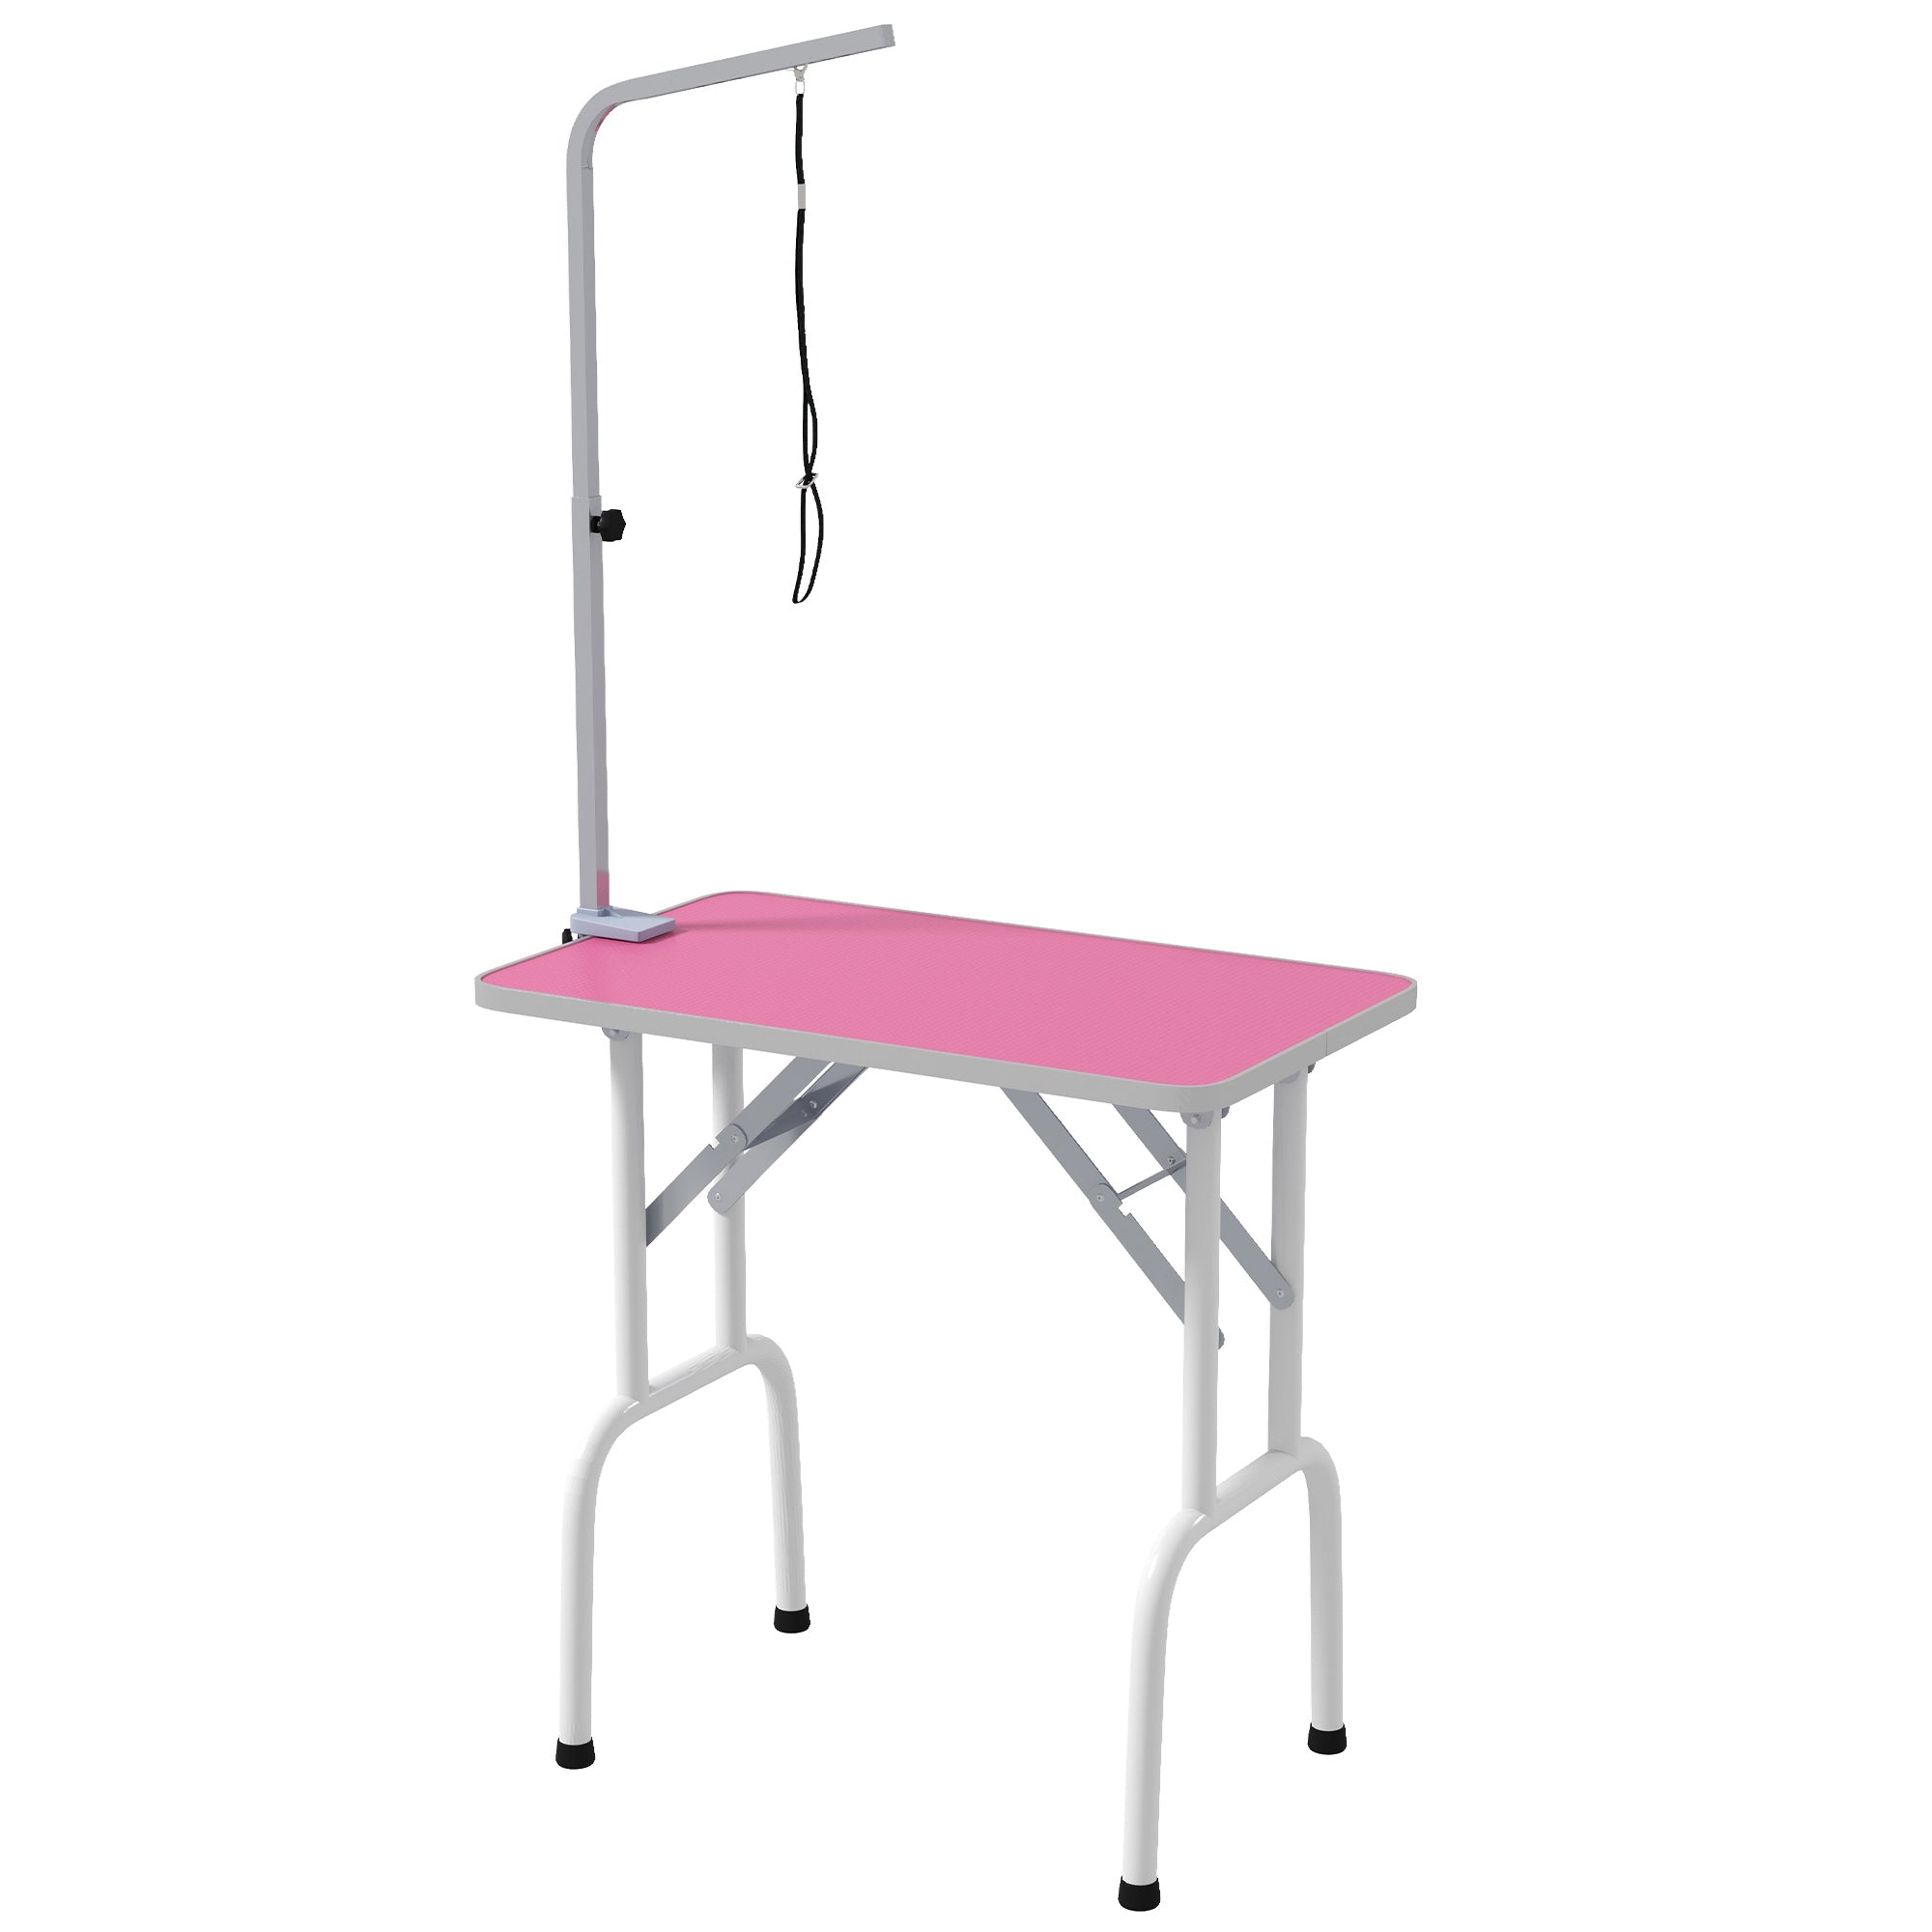 Foldable Pet Grooming Table for Dogs Cats with Adjustable Arm, Non-slip Surface, Pink - Gallery Canada